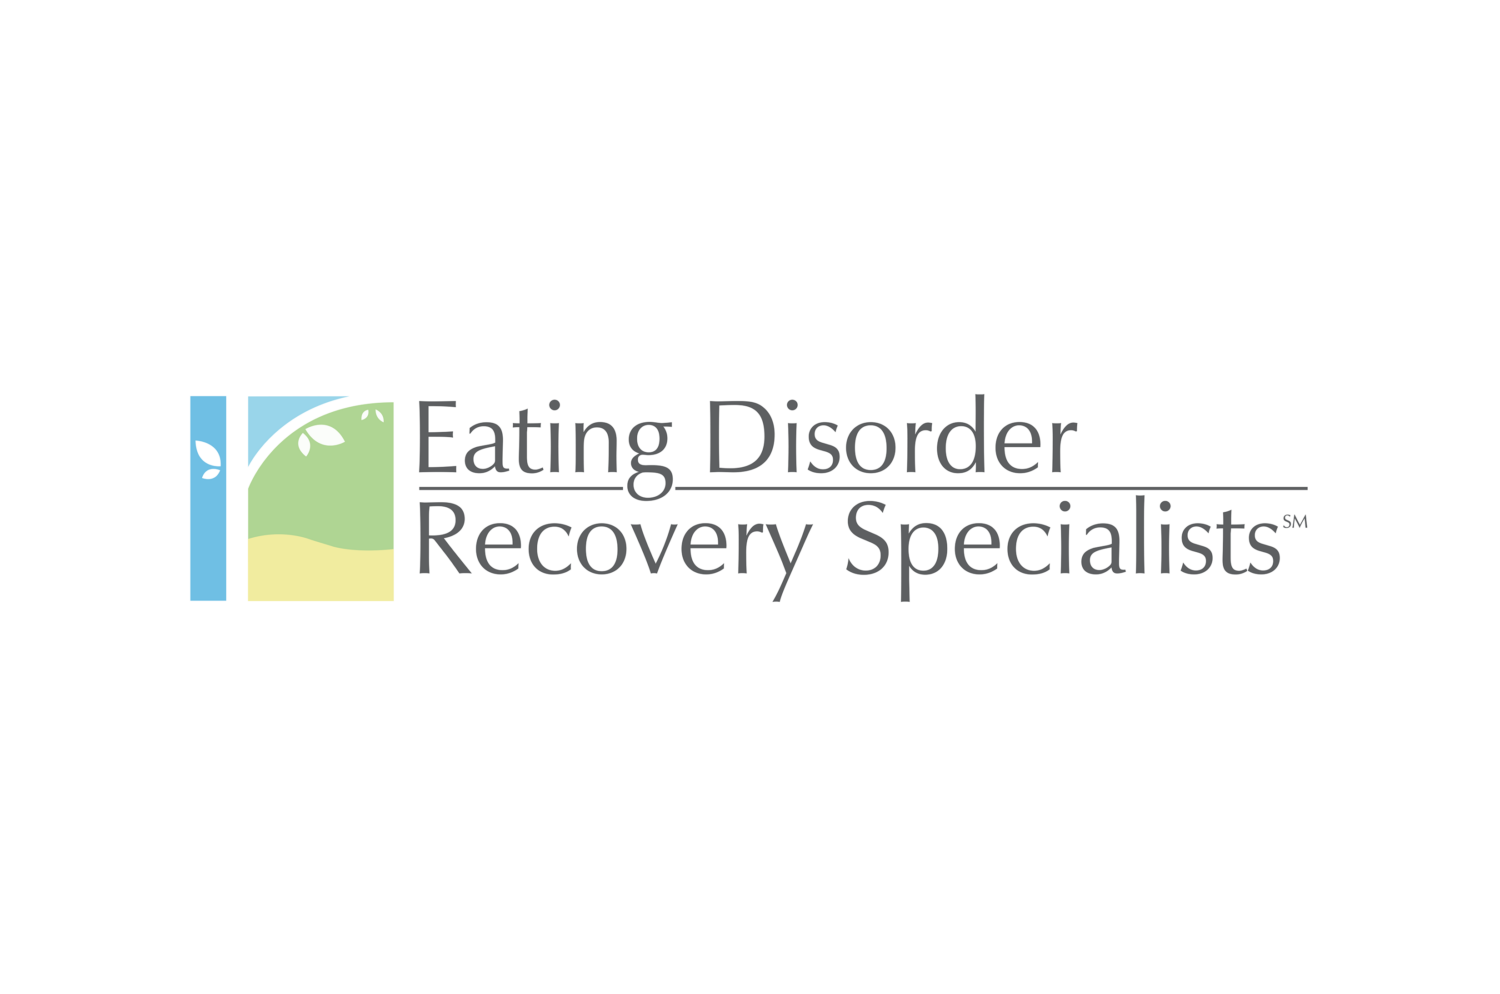 Finding Hope and Healing: An Eating Disorder Facility in New York City ...